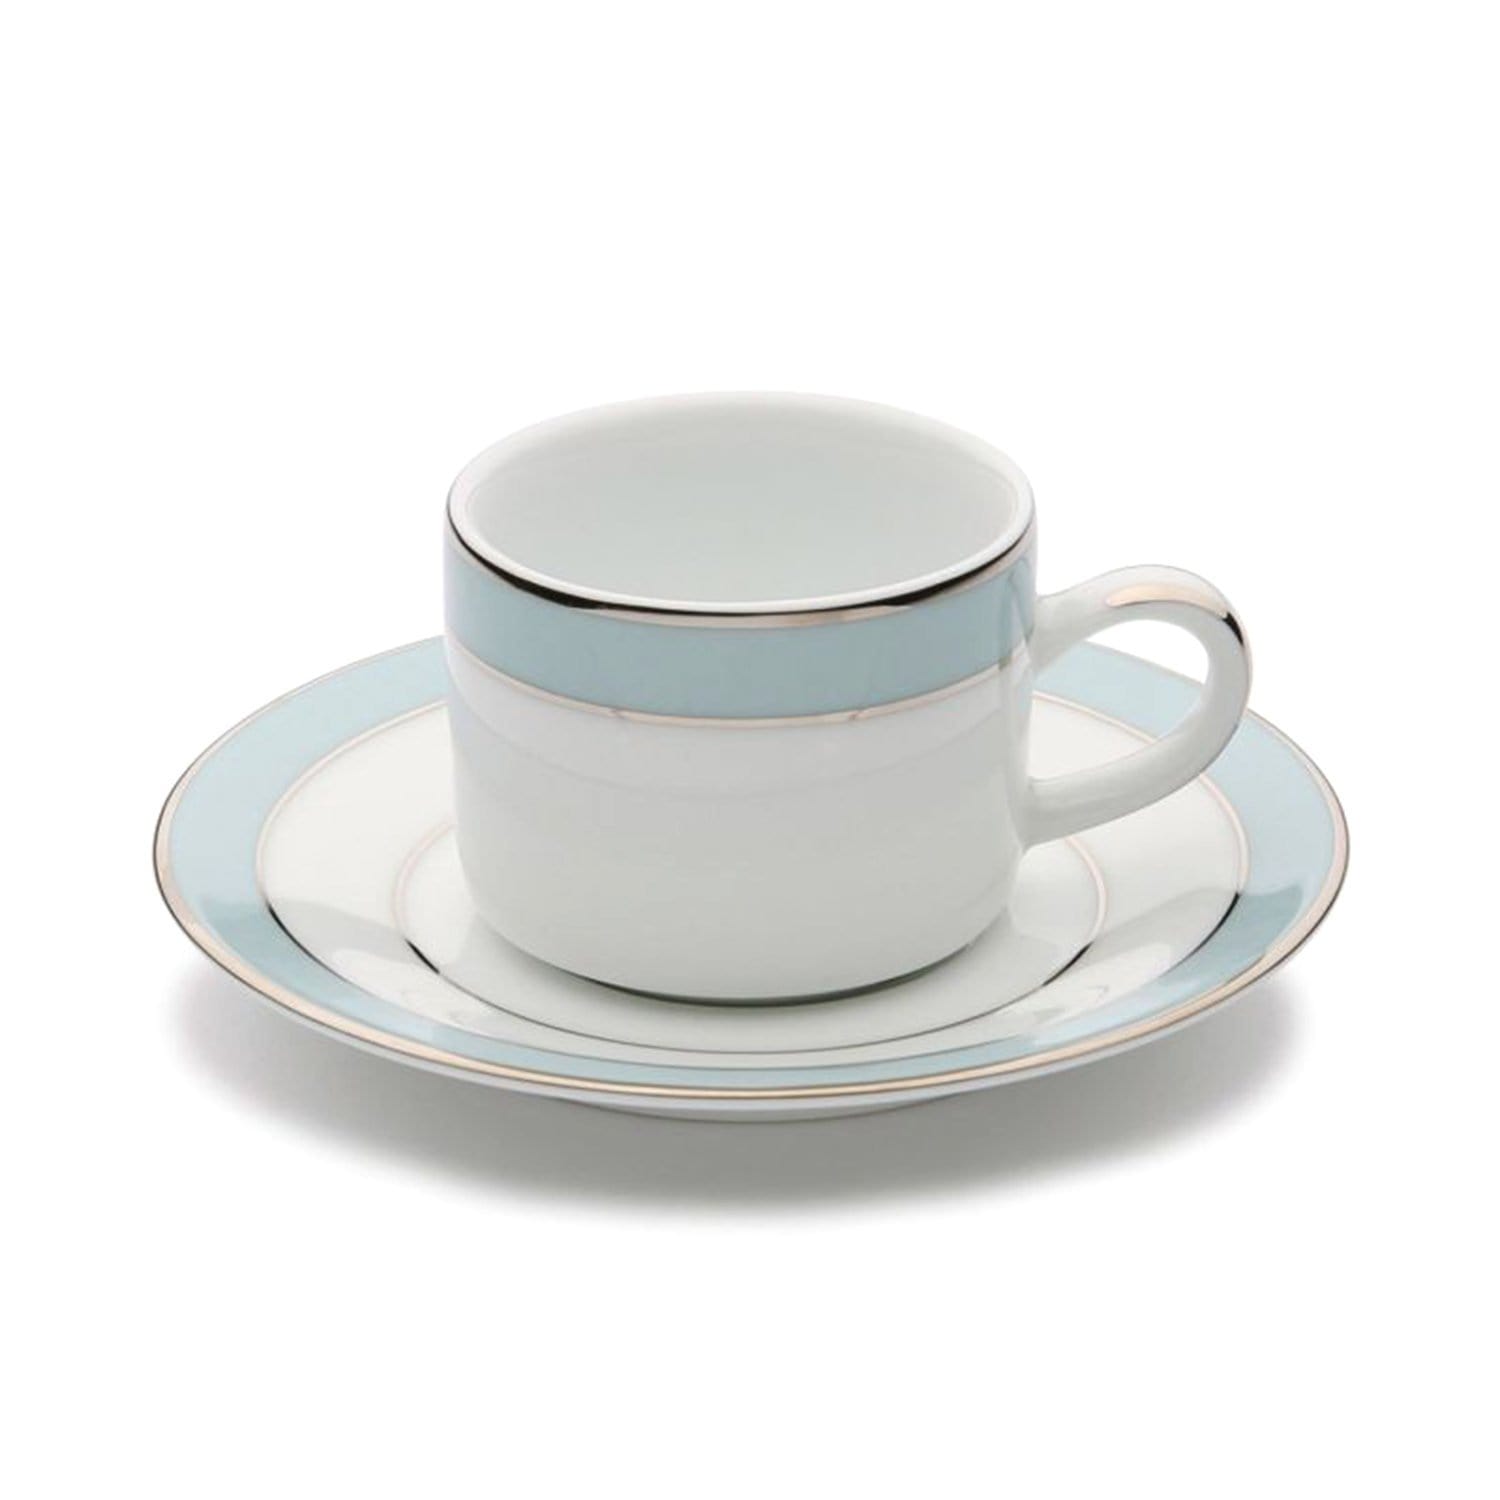 Dankotuwa Bella Coffee Cup and Saucer - White and Blue - BELLAB-92/93 - Jashanmal Home